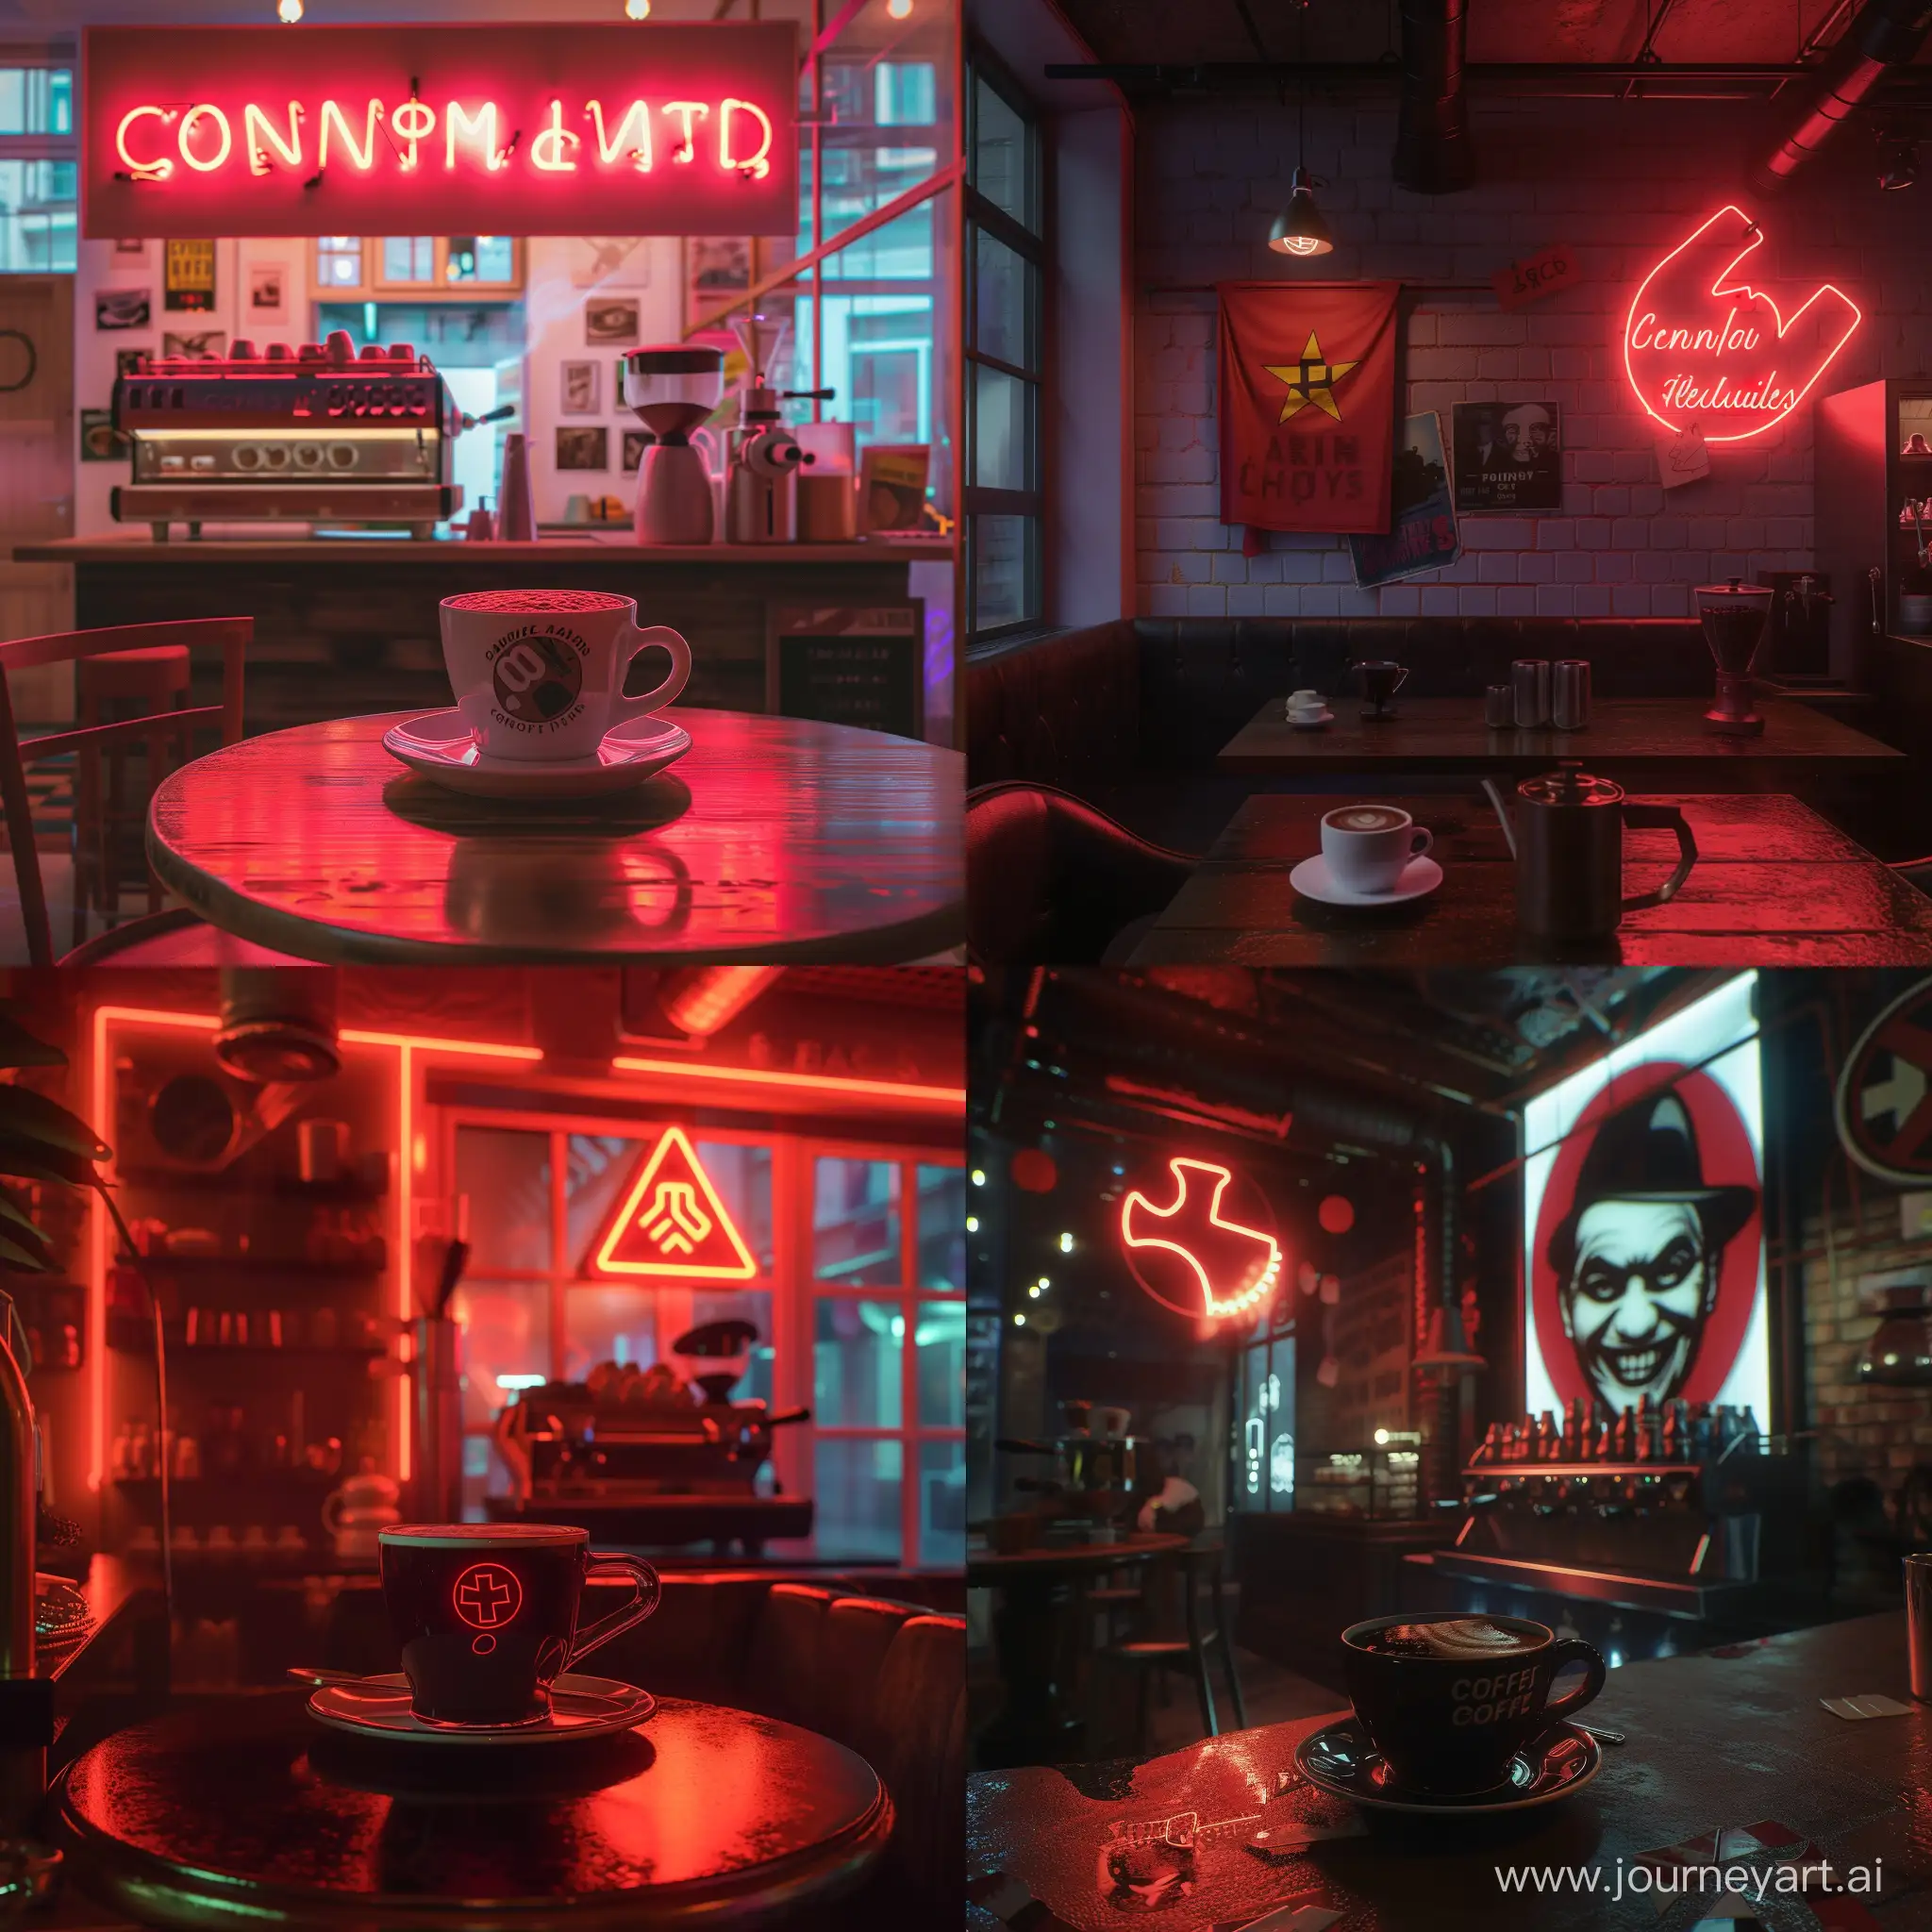 Joyful-and-Melancholic-Atmosphere-in-a-Neon-Coffee-Shop-Under-Communist-and-Nazi-Influence